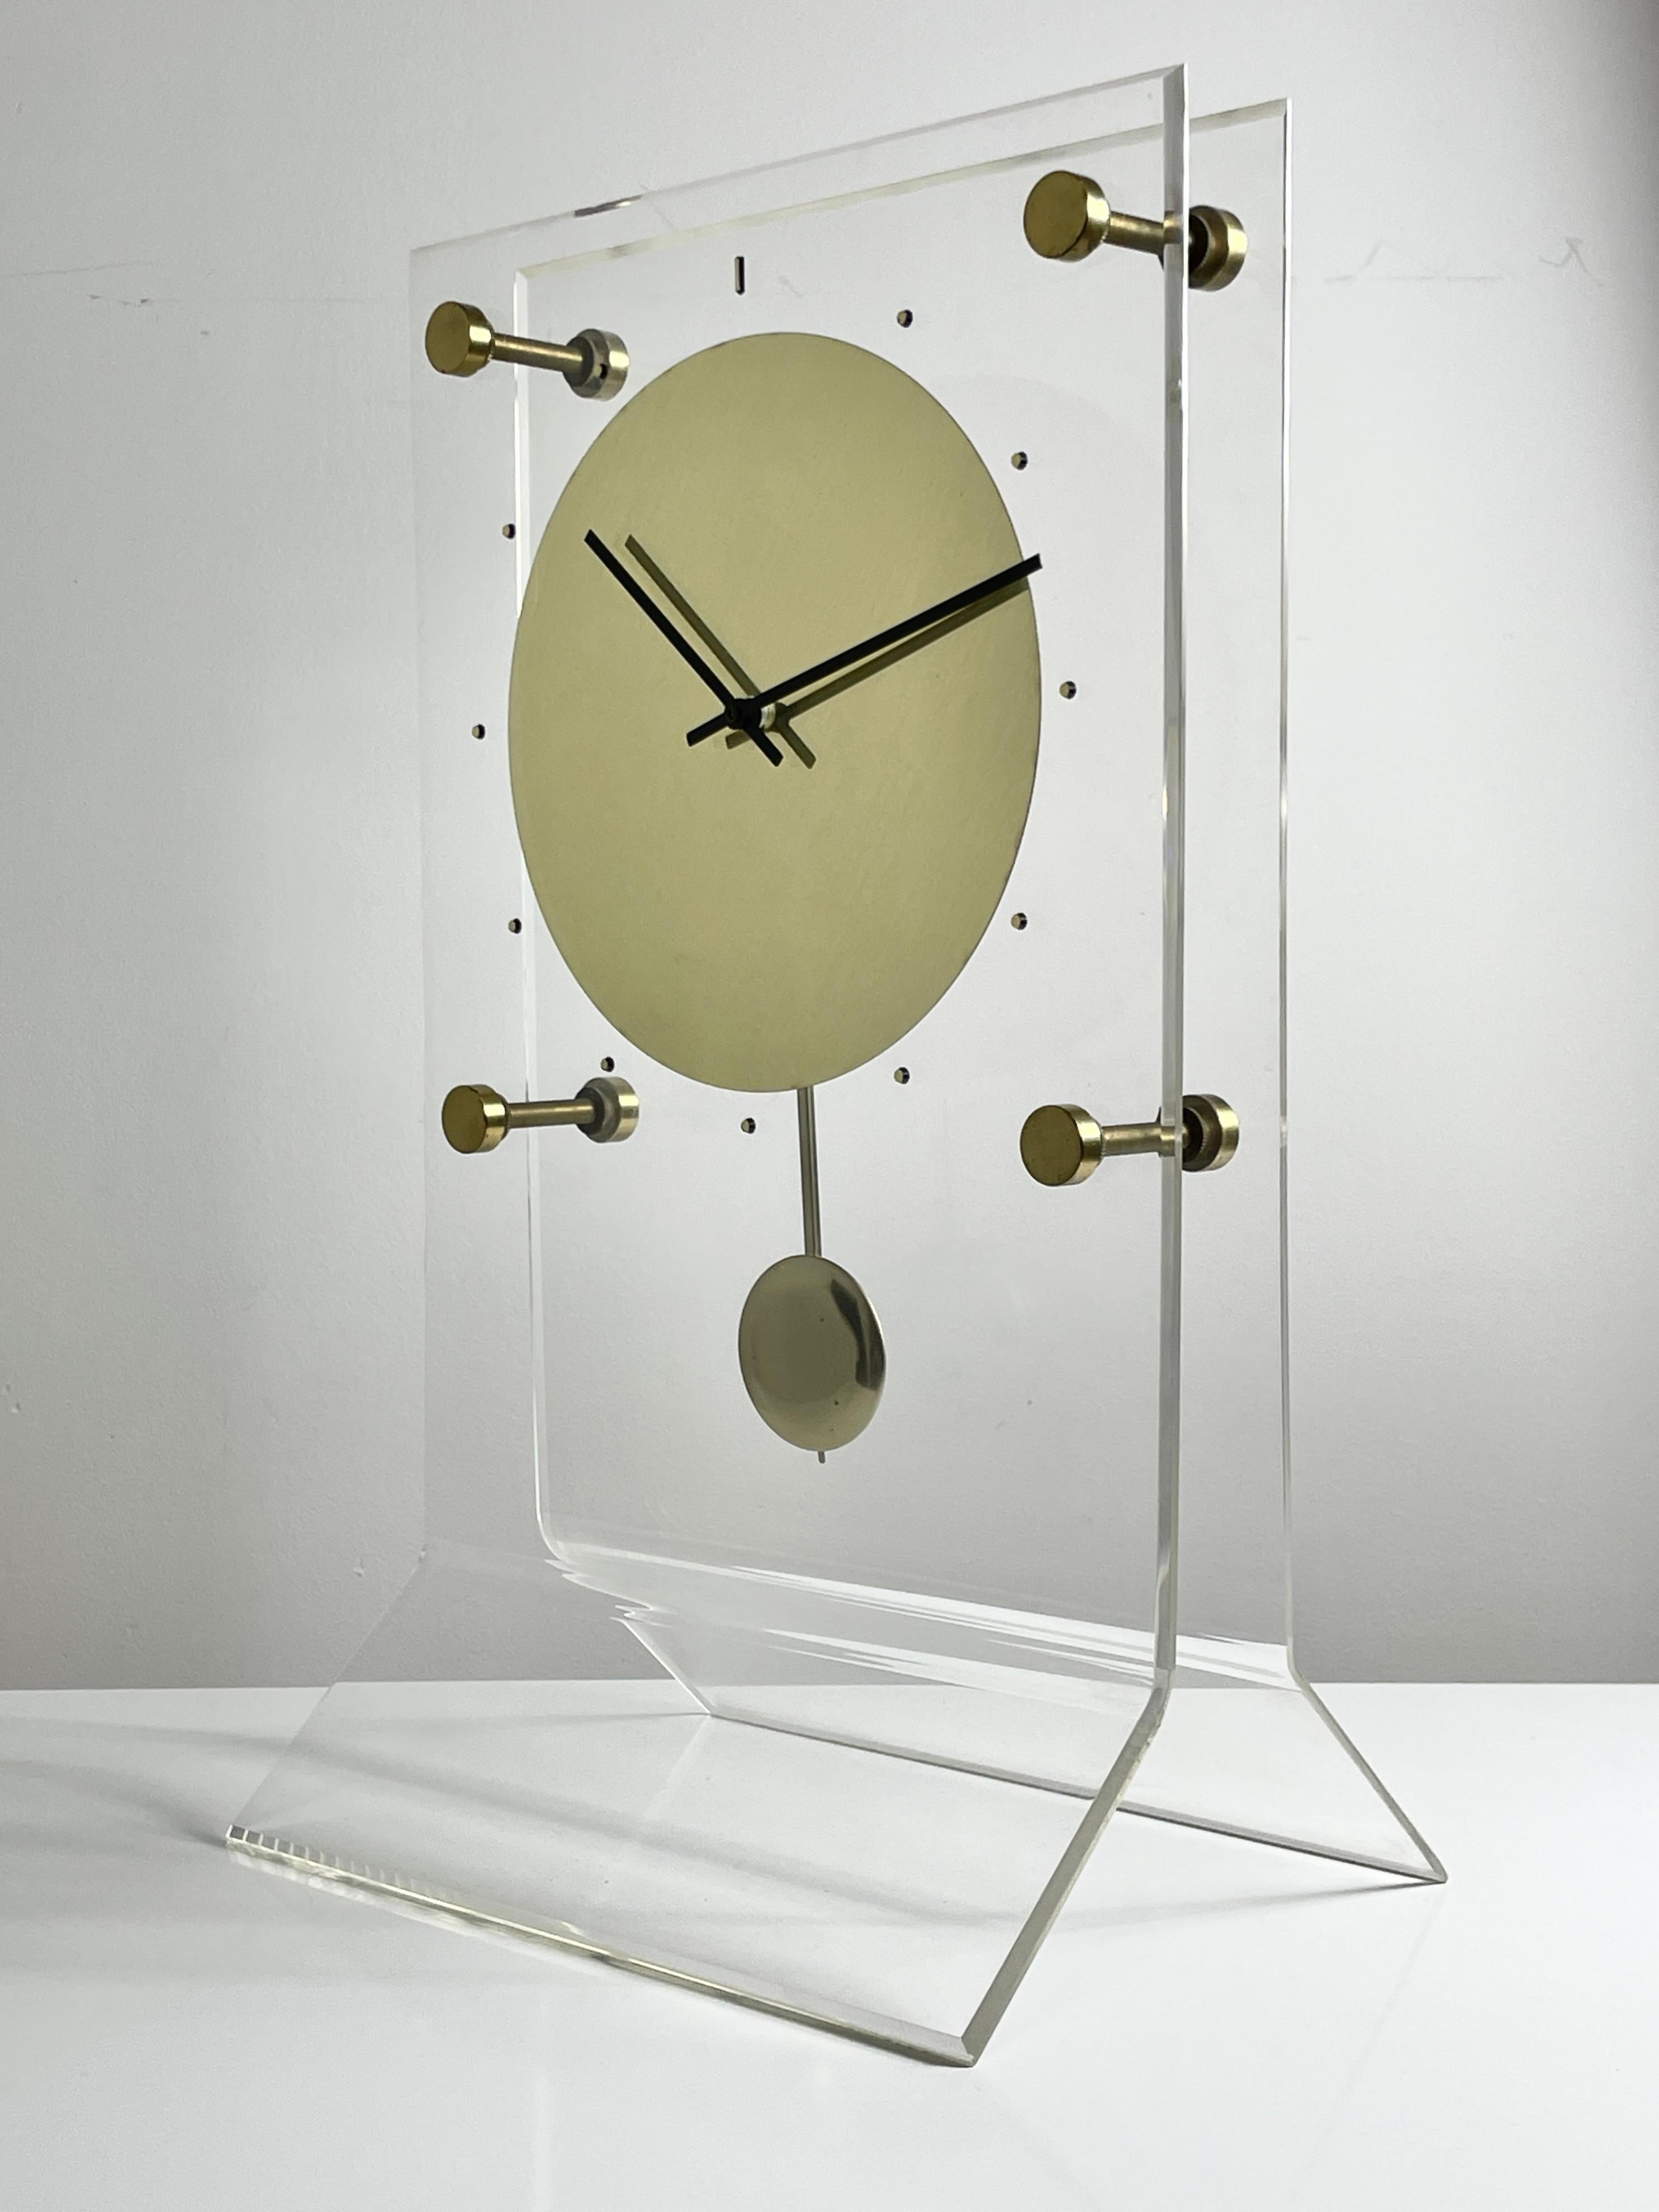 Large Vintage Lucite Brass Pendulum Mantel Clock 1970s

A rare lucite and brass mantel clock circa 1970s
Unique modern design with floating brass face and pendulum
Unmarked

Additional Information:
Materials: Lucite and Brass
Dimensions: 9.5